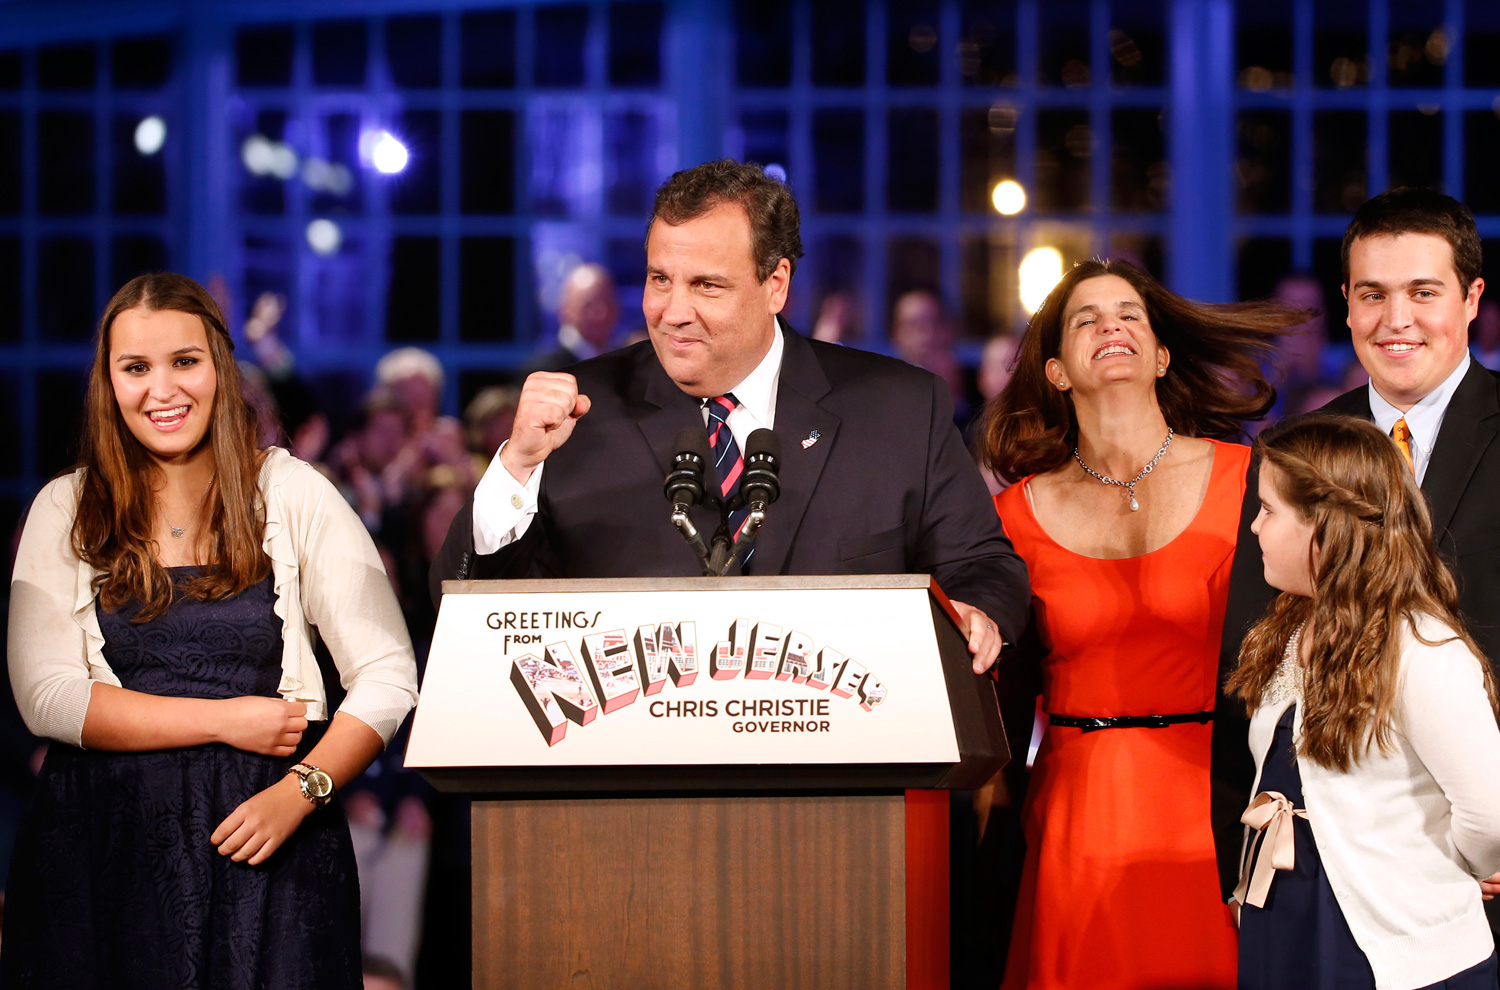 Don’t Get Too Excited About Christie’s Politics of Style, Not Substance